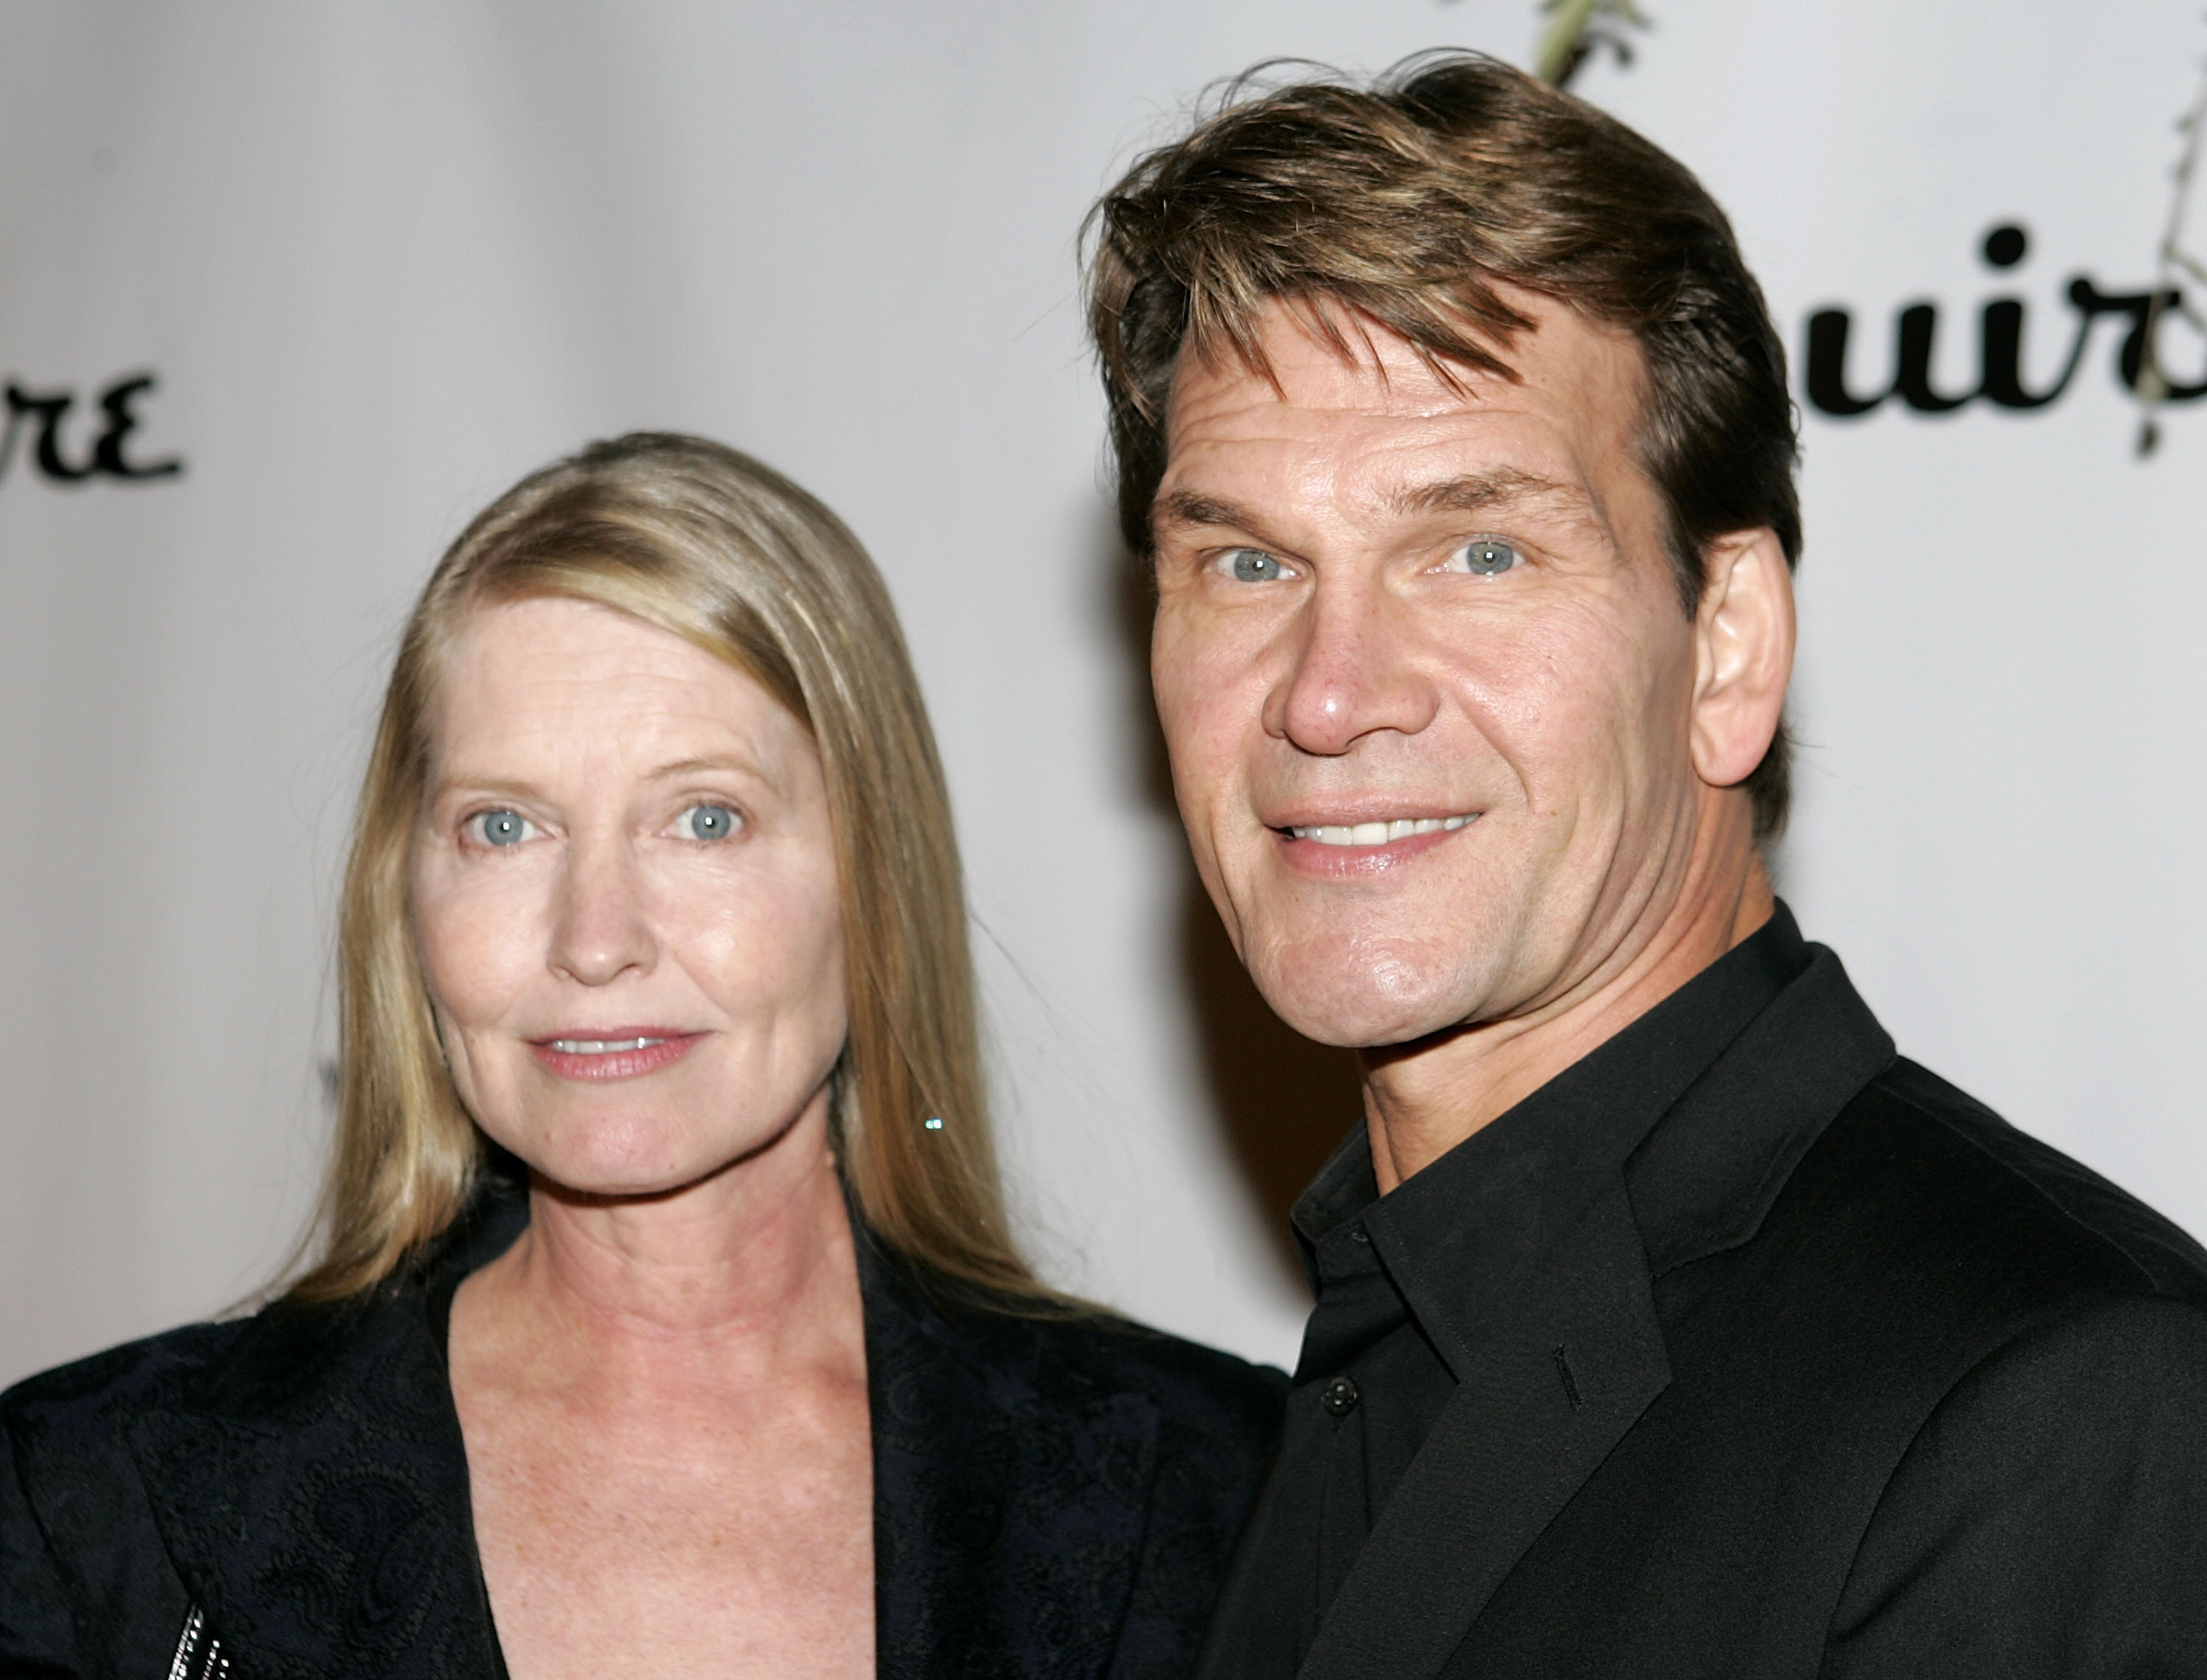 Actor Patrick Swayze (right) and his wife Lisa Niemi arrive for the 2nd Annual Ocean Partners Awards Gala on November 11, 2004 in Los Angeles, California | Source: Getty Images